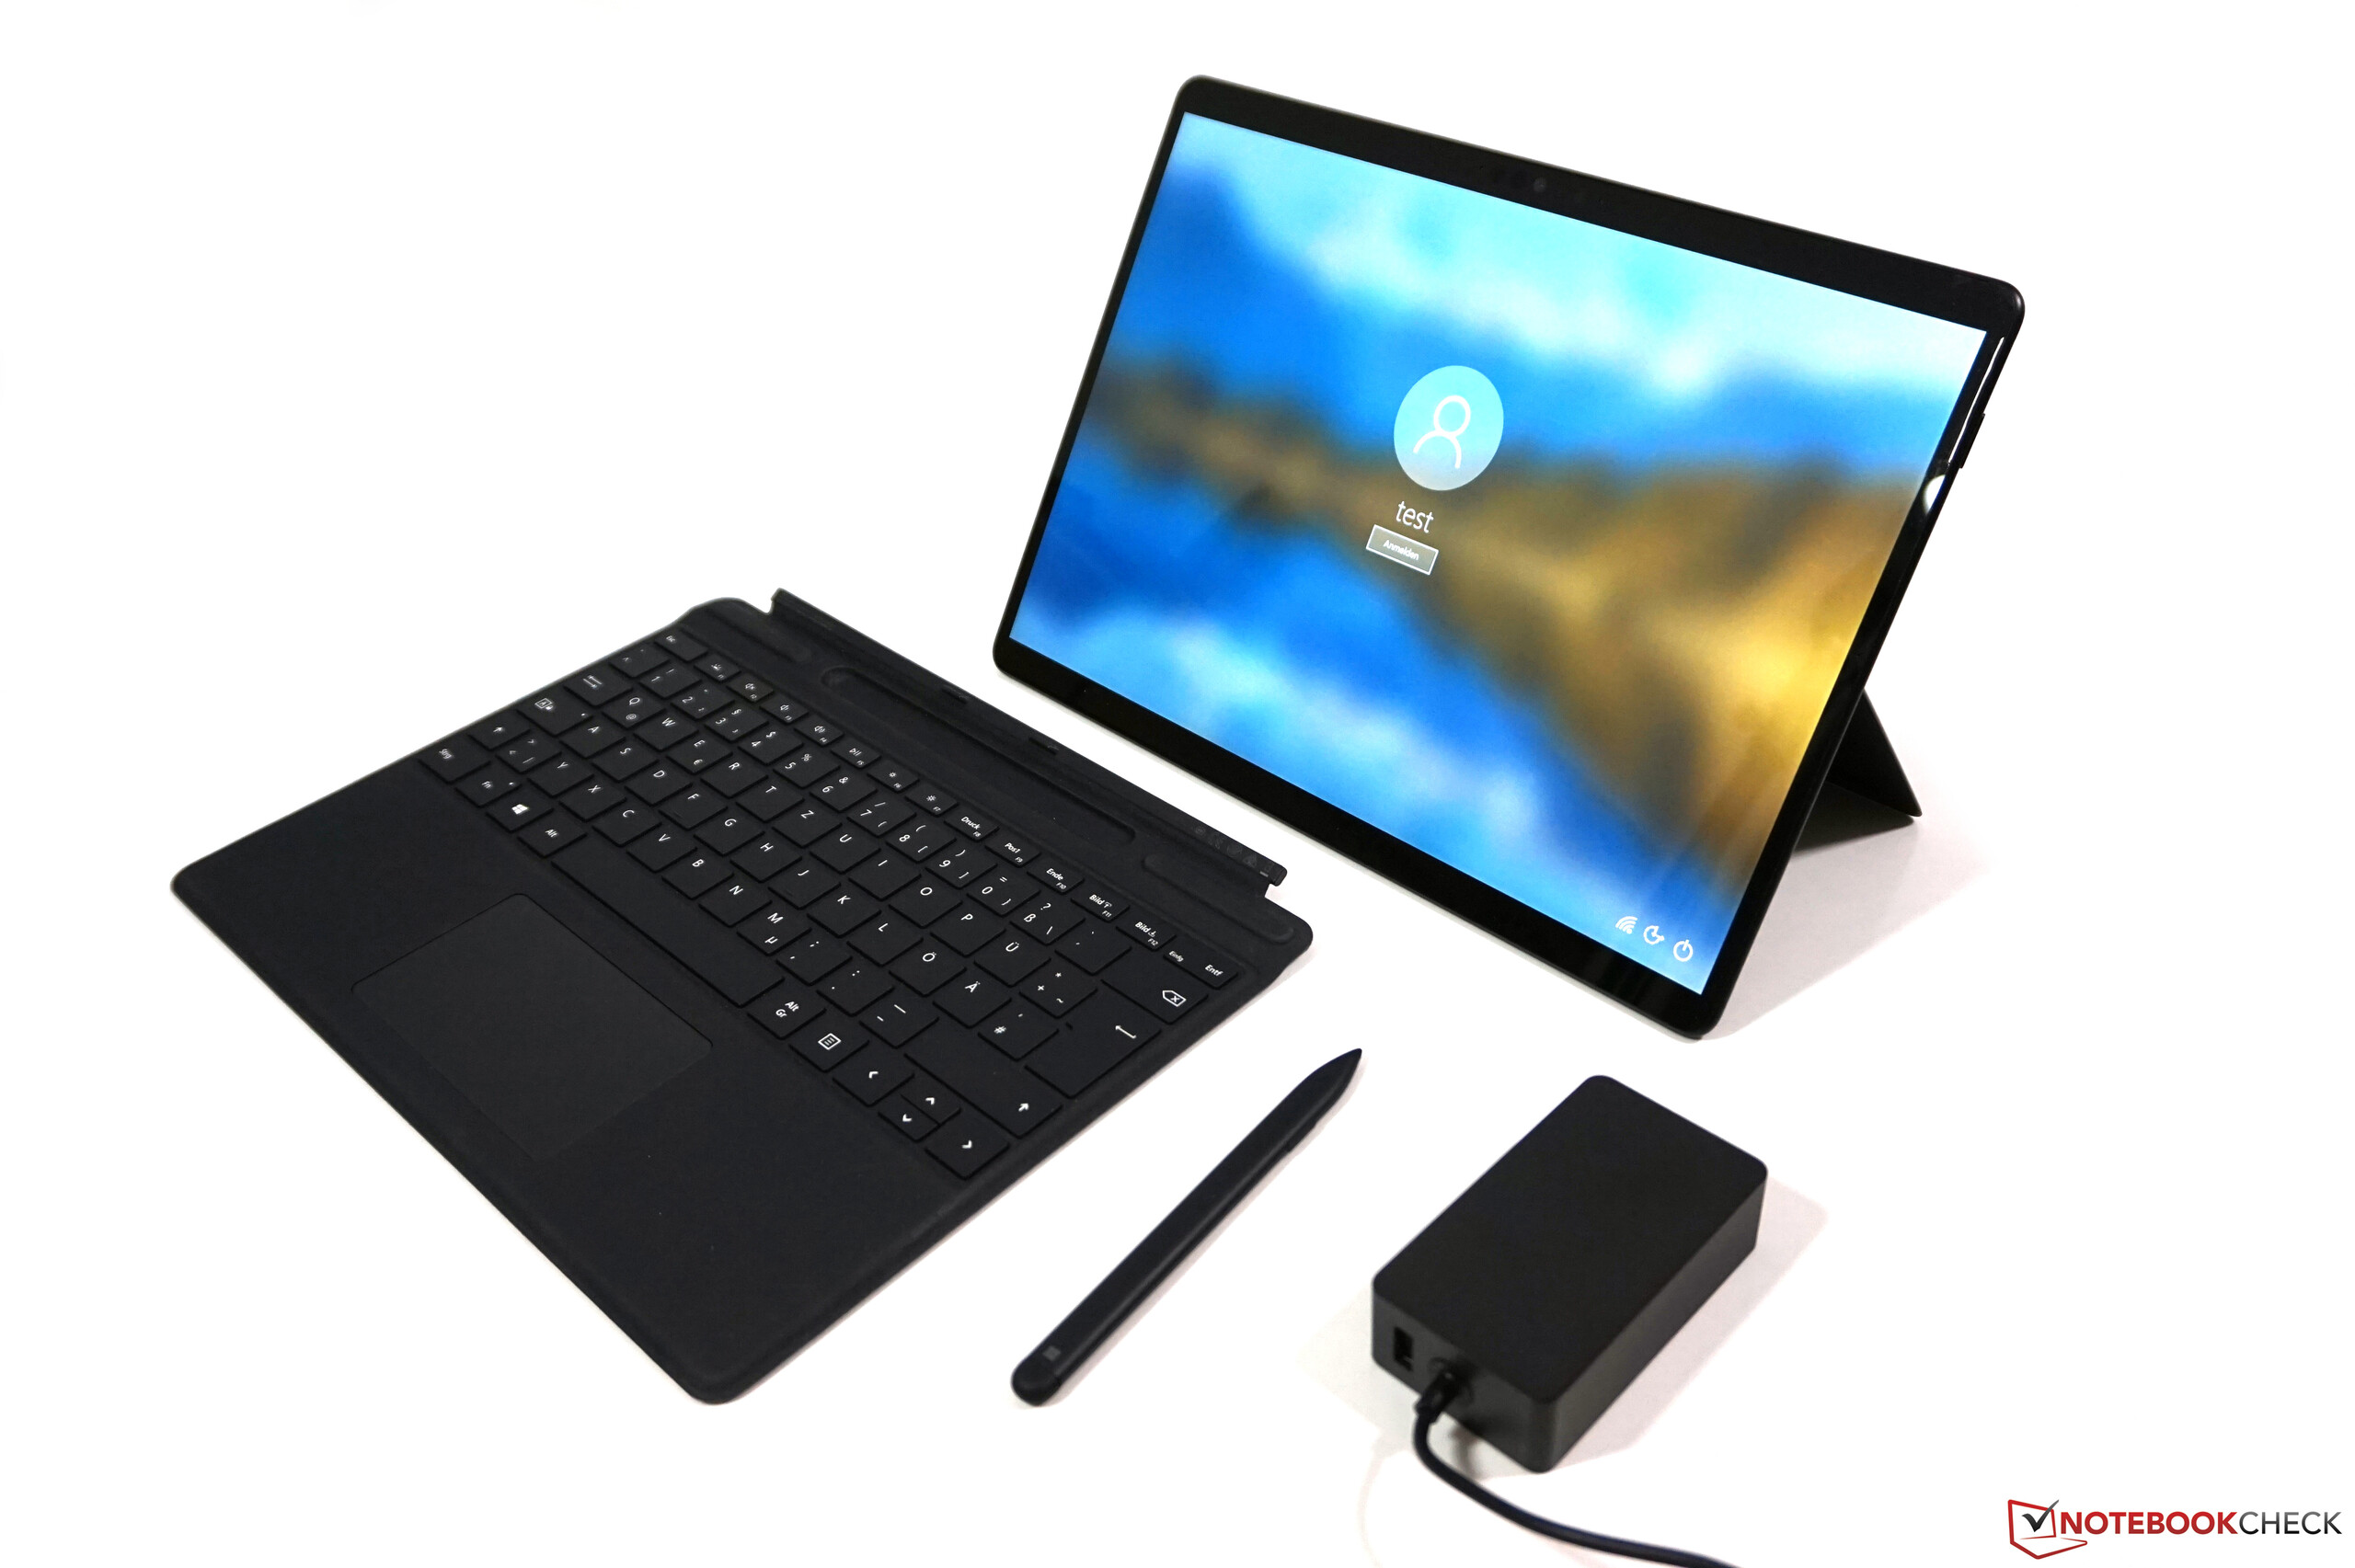 Microsoft Surface Pro X Review - Microsoft's ARM-based tablet with